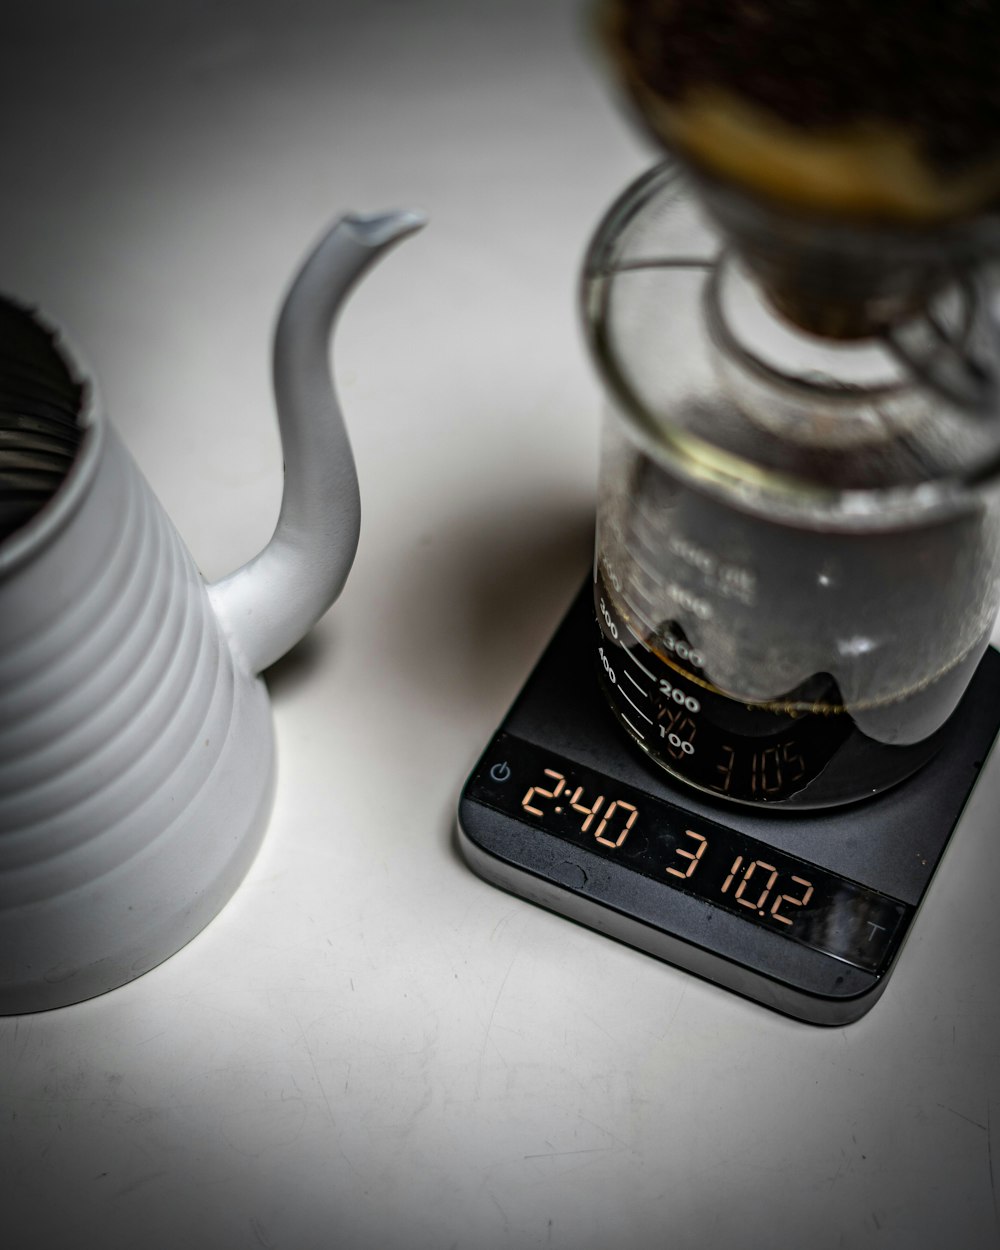 liquid filled measuring cup on device displaying 2:40 and 310.2